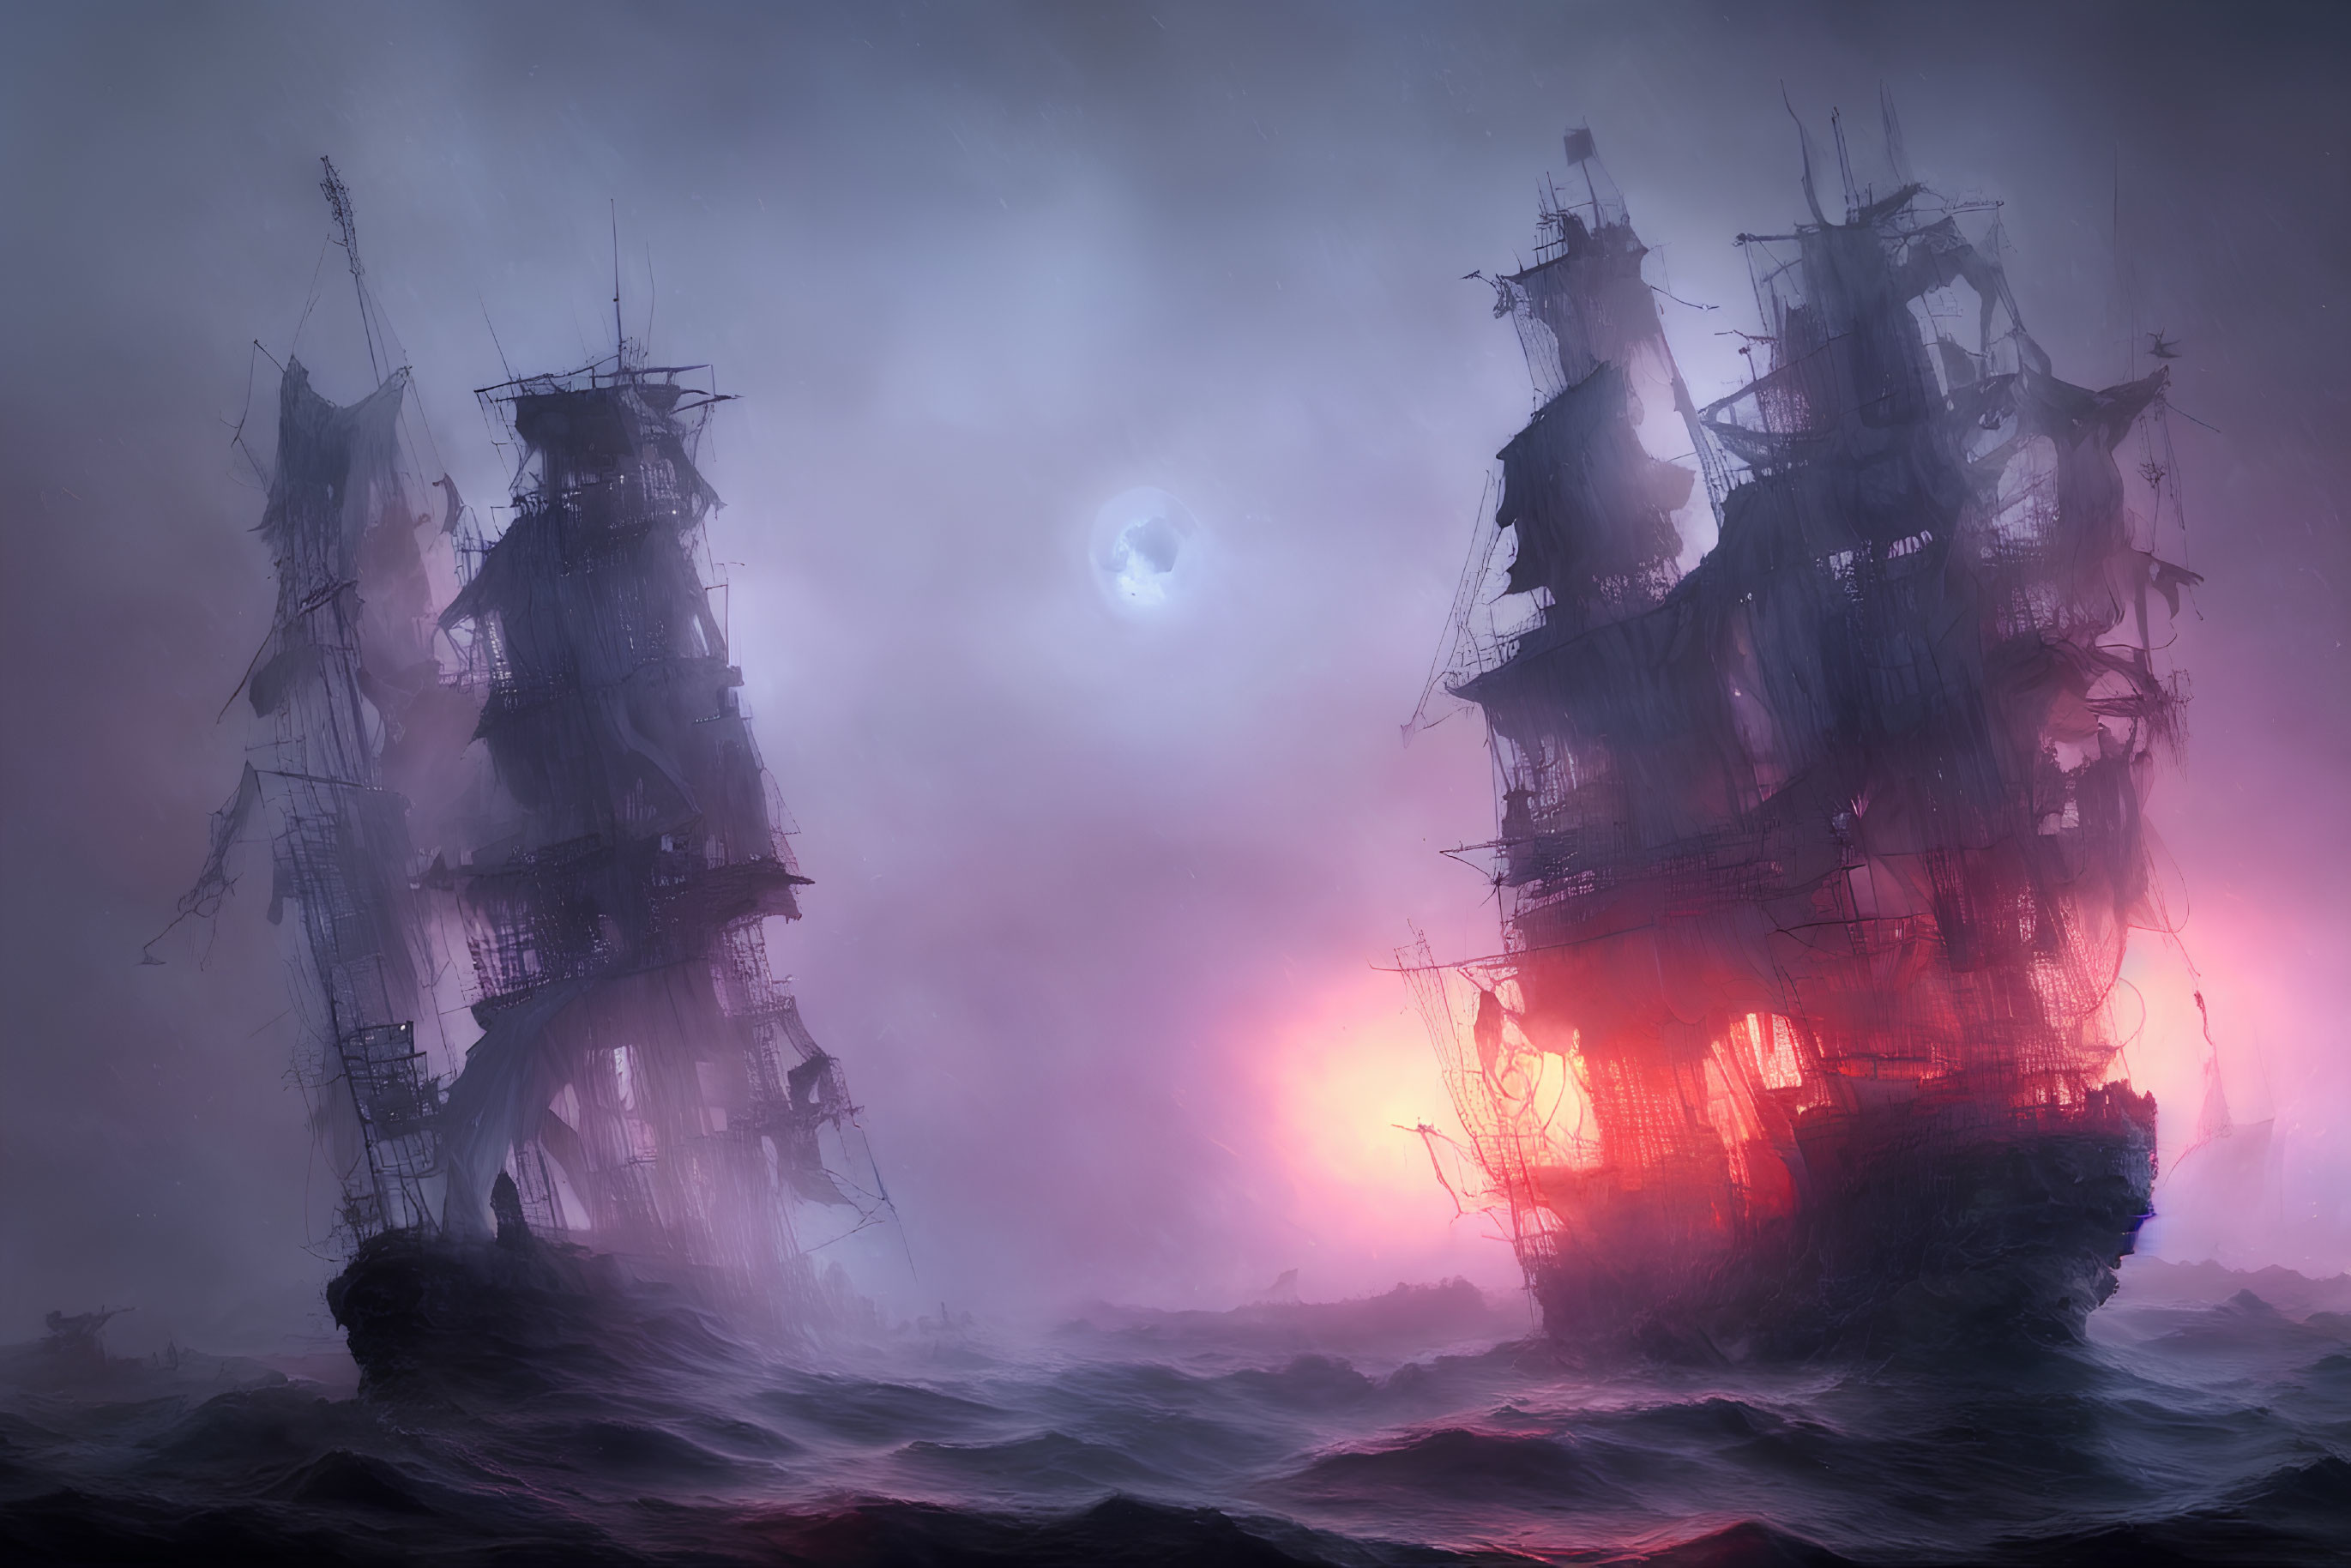 Ghostly sailing ships in mist on haunting sea.